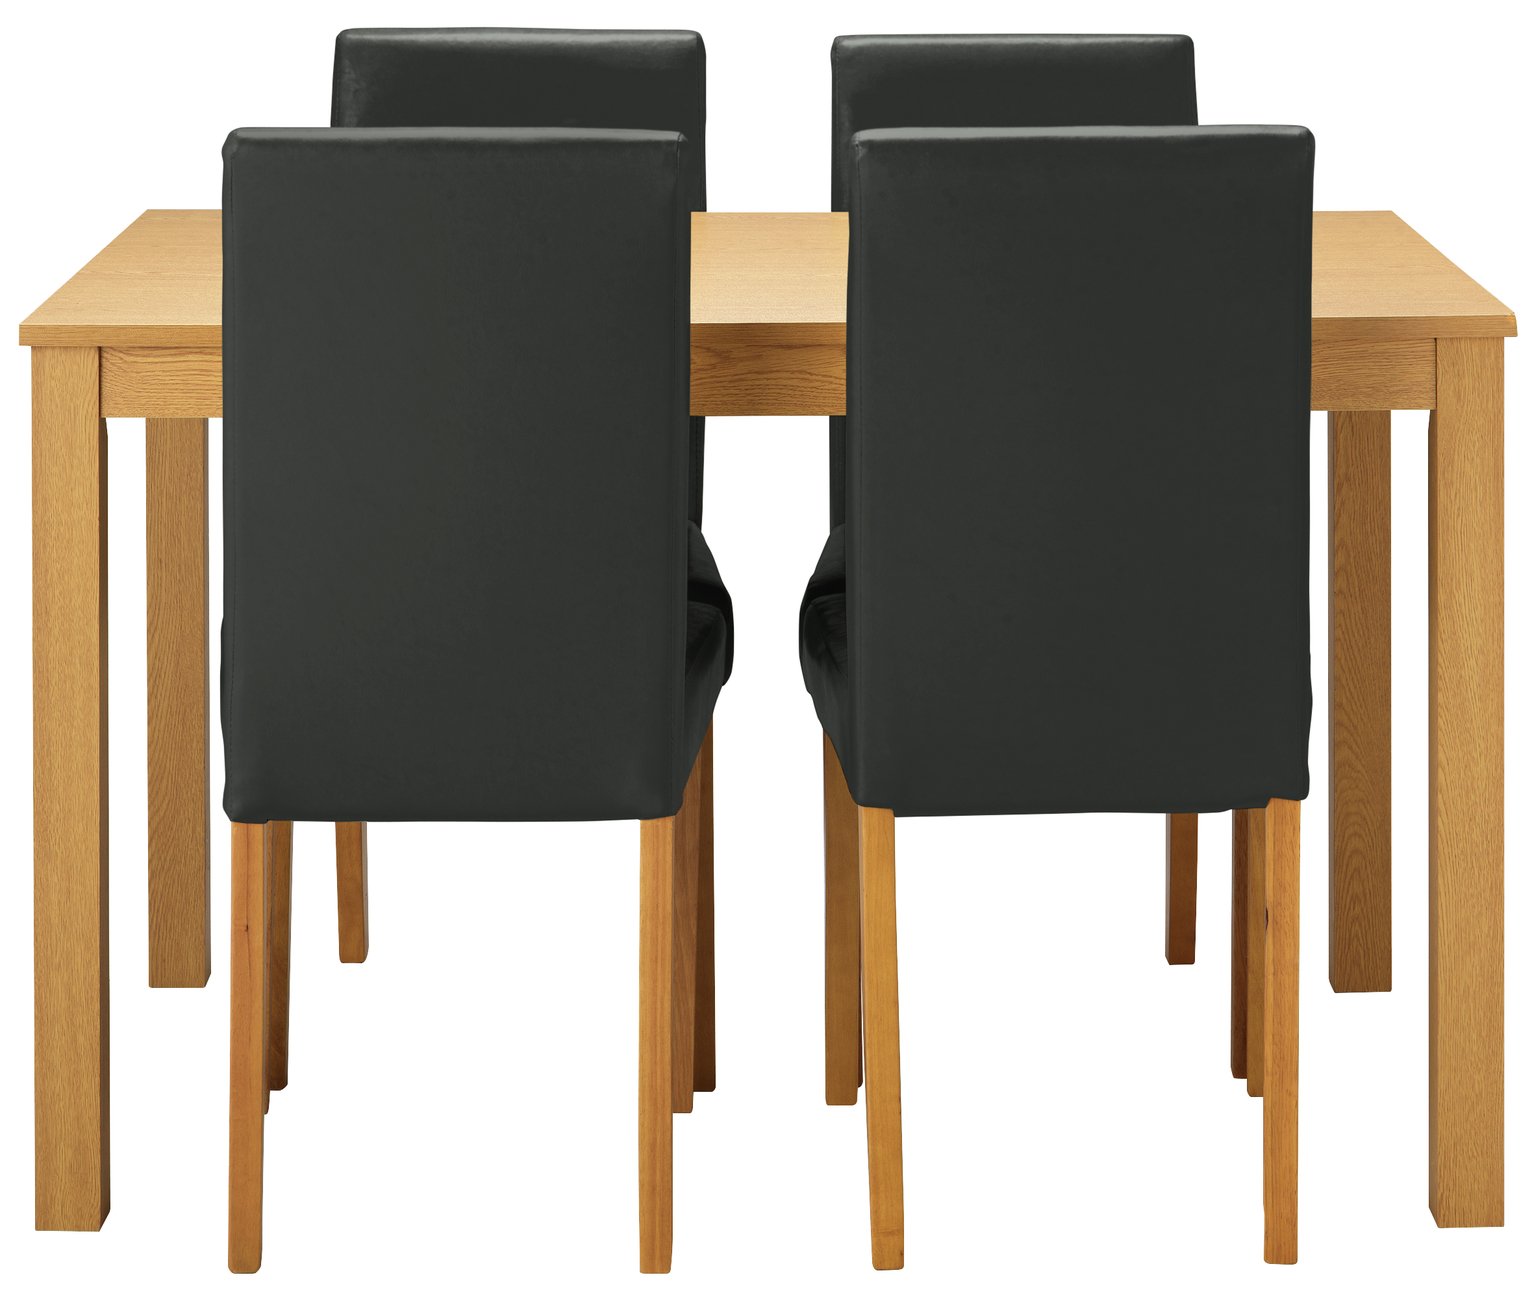 Argos Home Elmdon Oak Effect Dining Table & 4 Chairs - Black